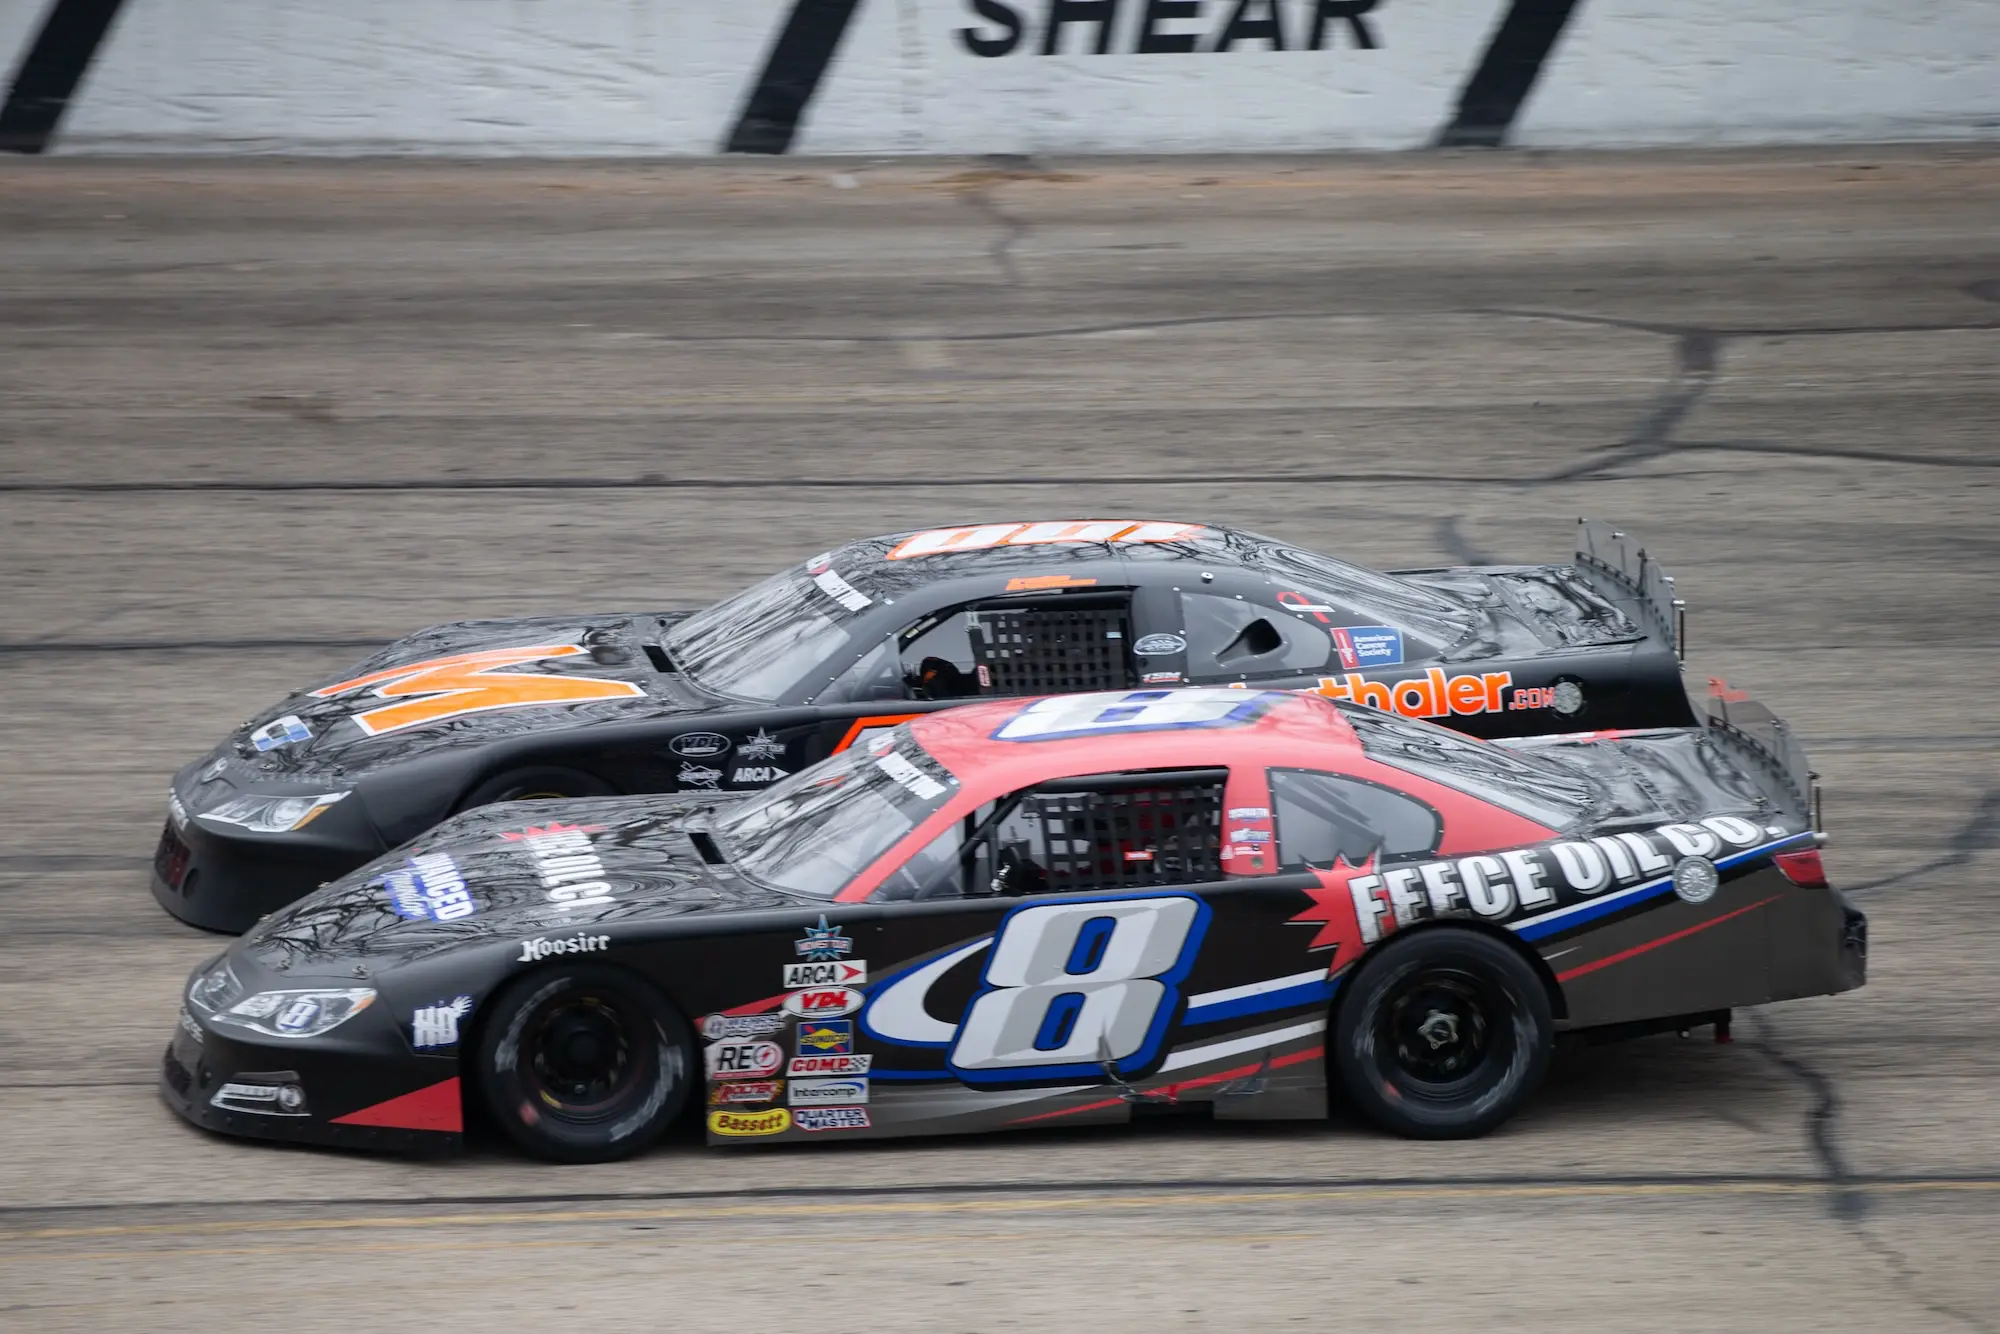 Featured image for “Chicagoland Champ Hoffman Latest Lettow Entry at Madison”